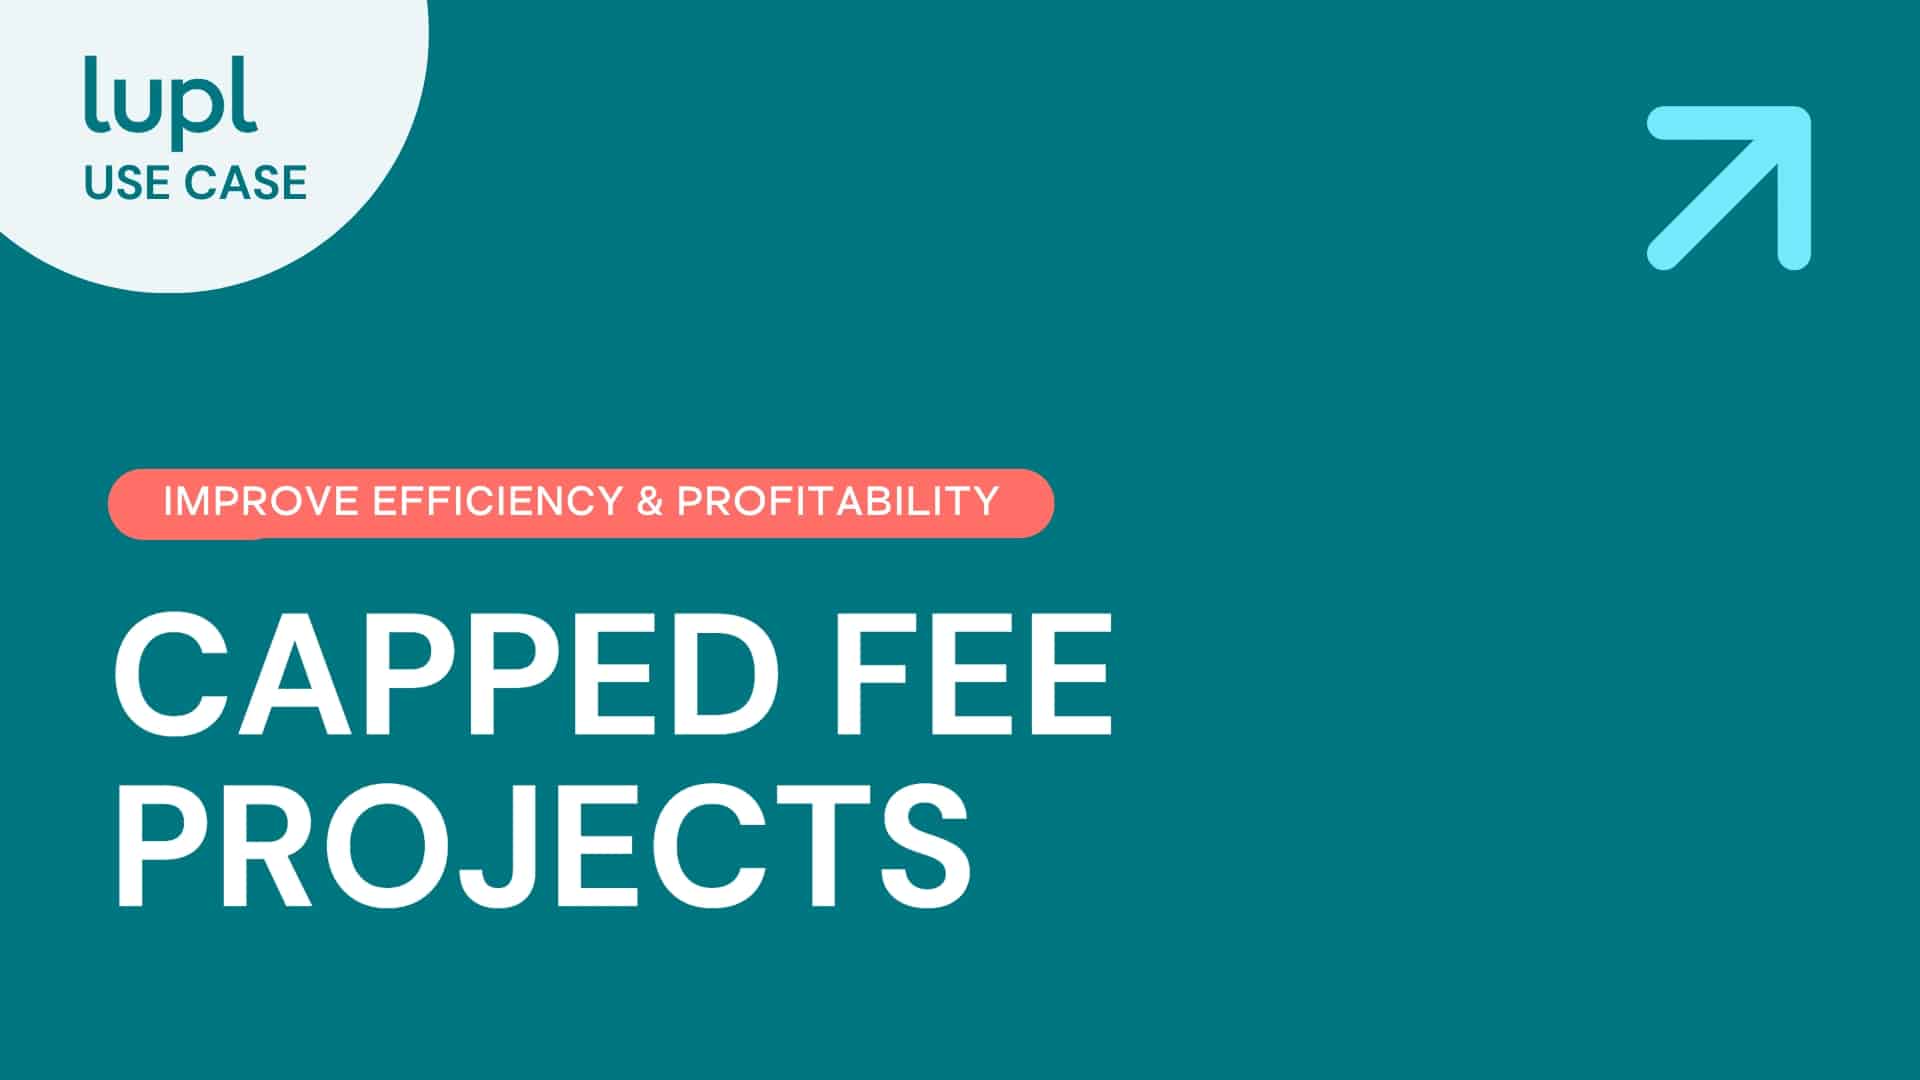 Lupl can be used to deliver capped fee matters on time and budget.